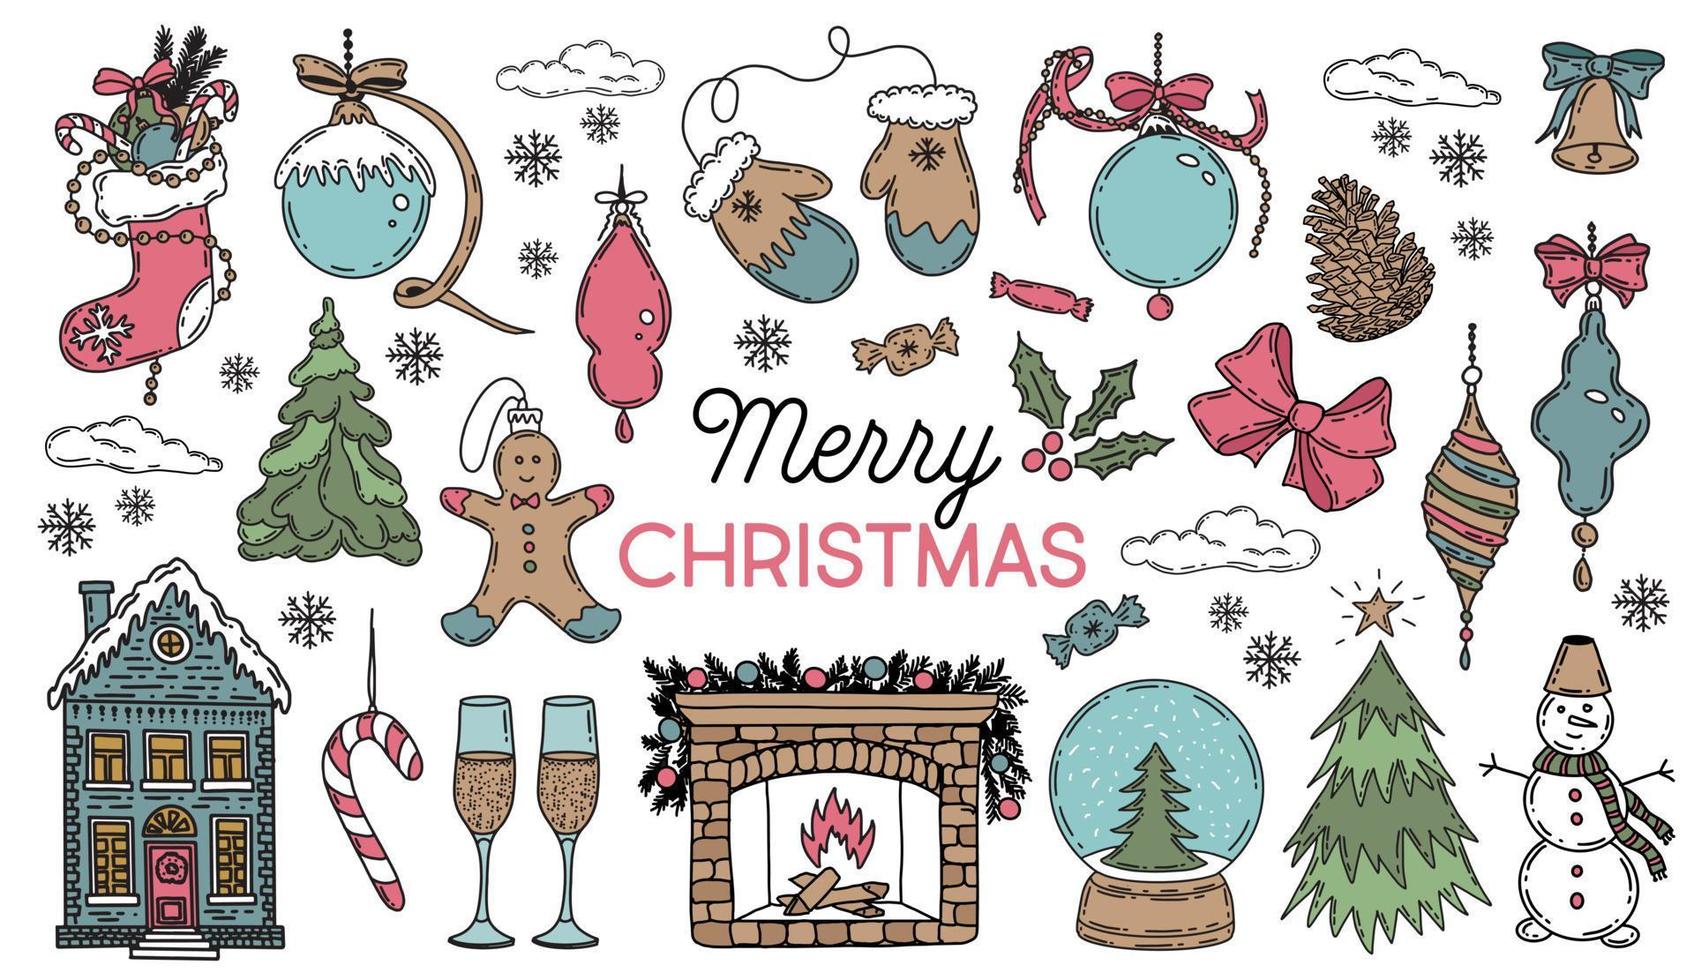 Christmas pattern in sketch style. Hand drawn illustration vector